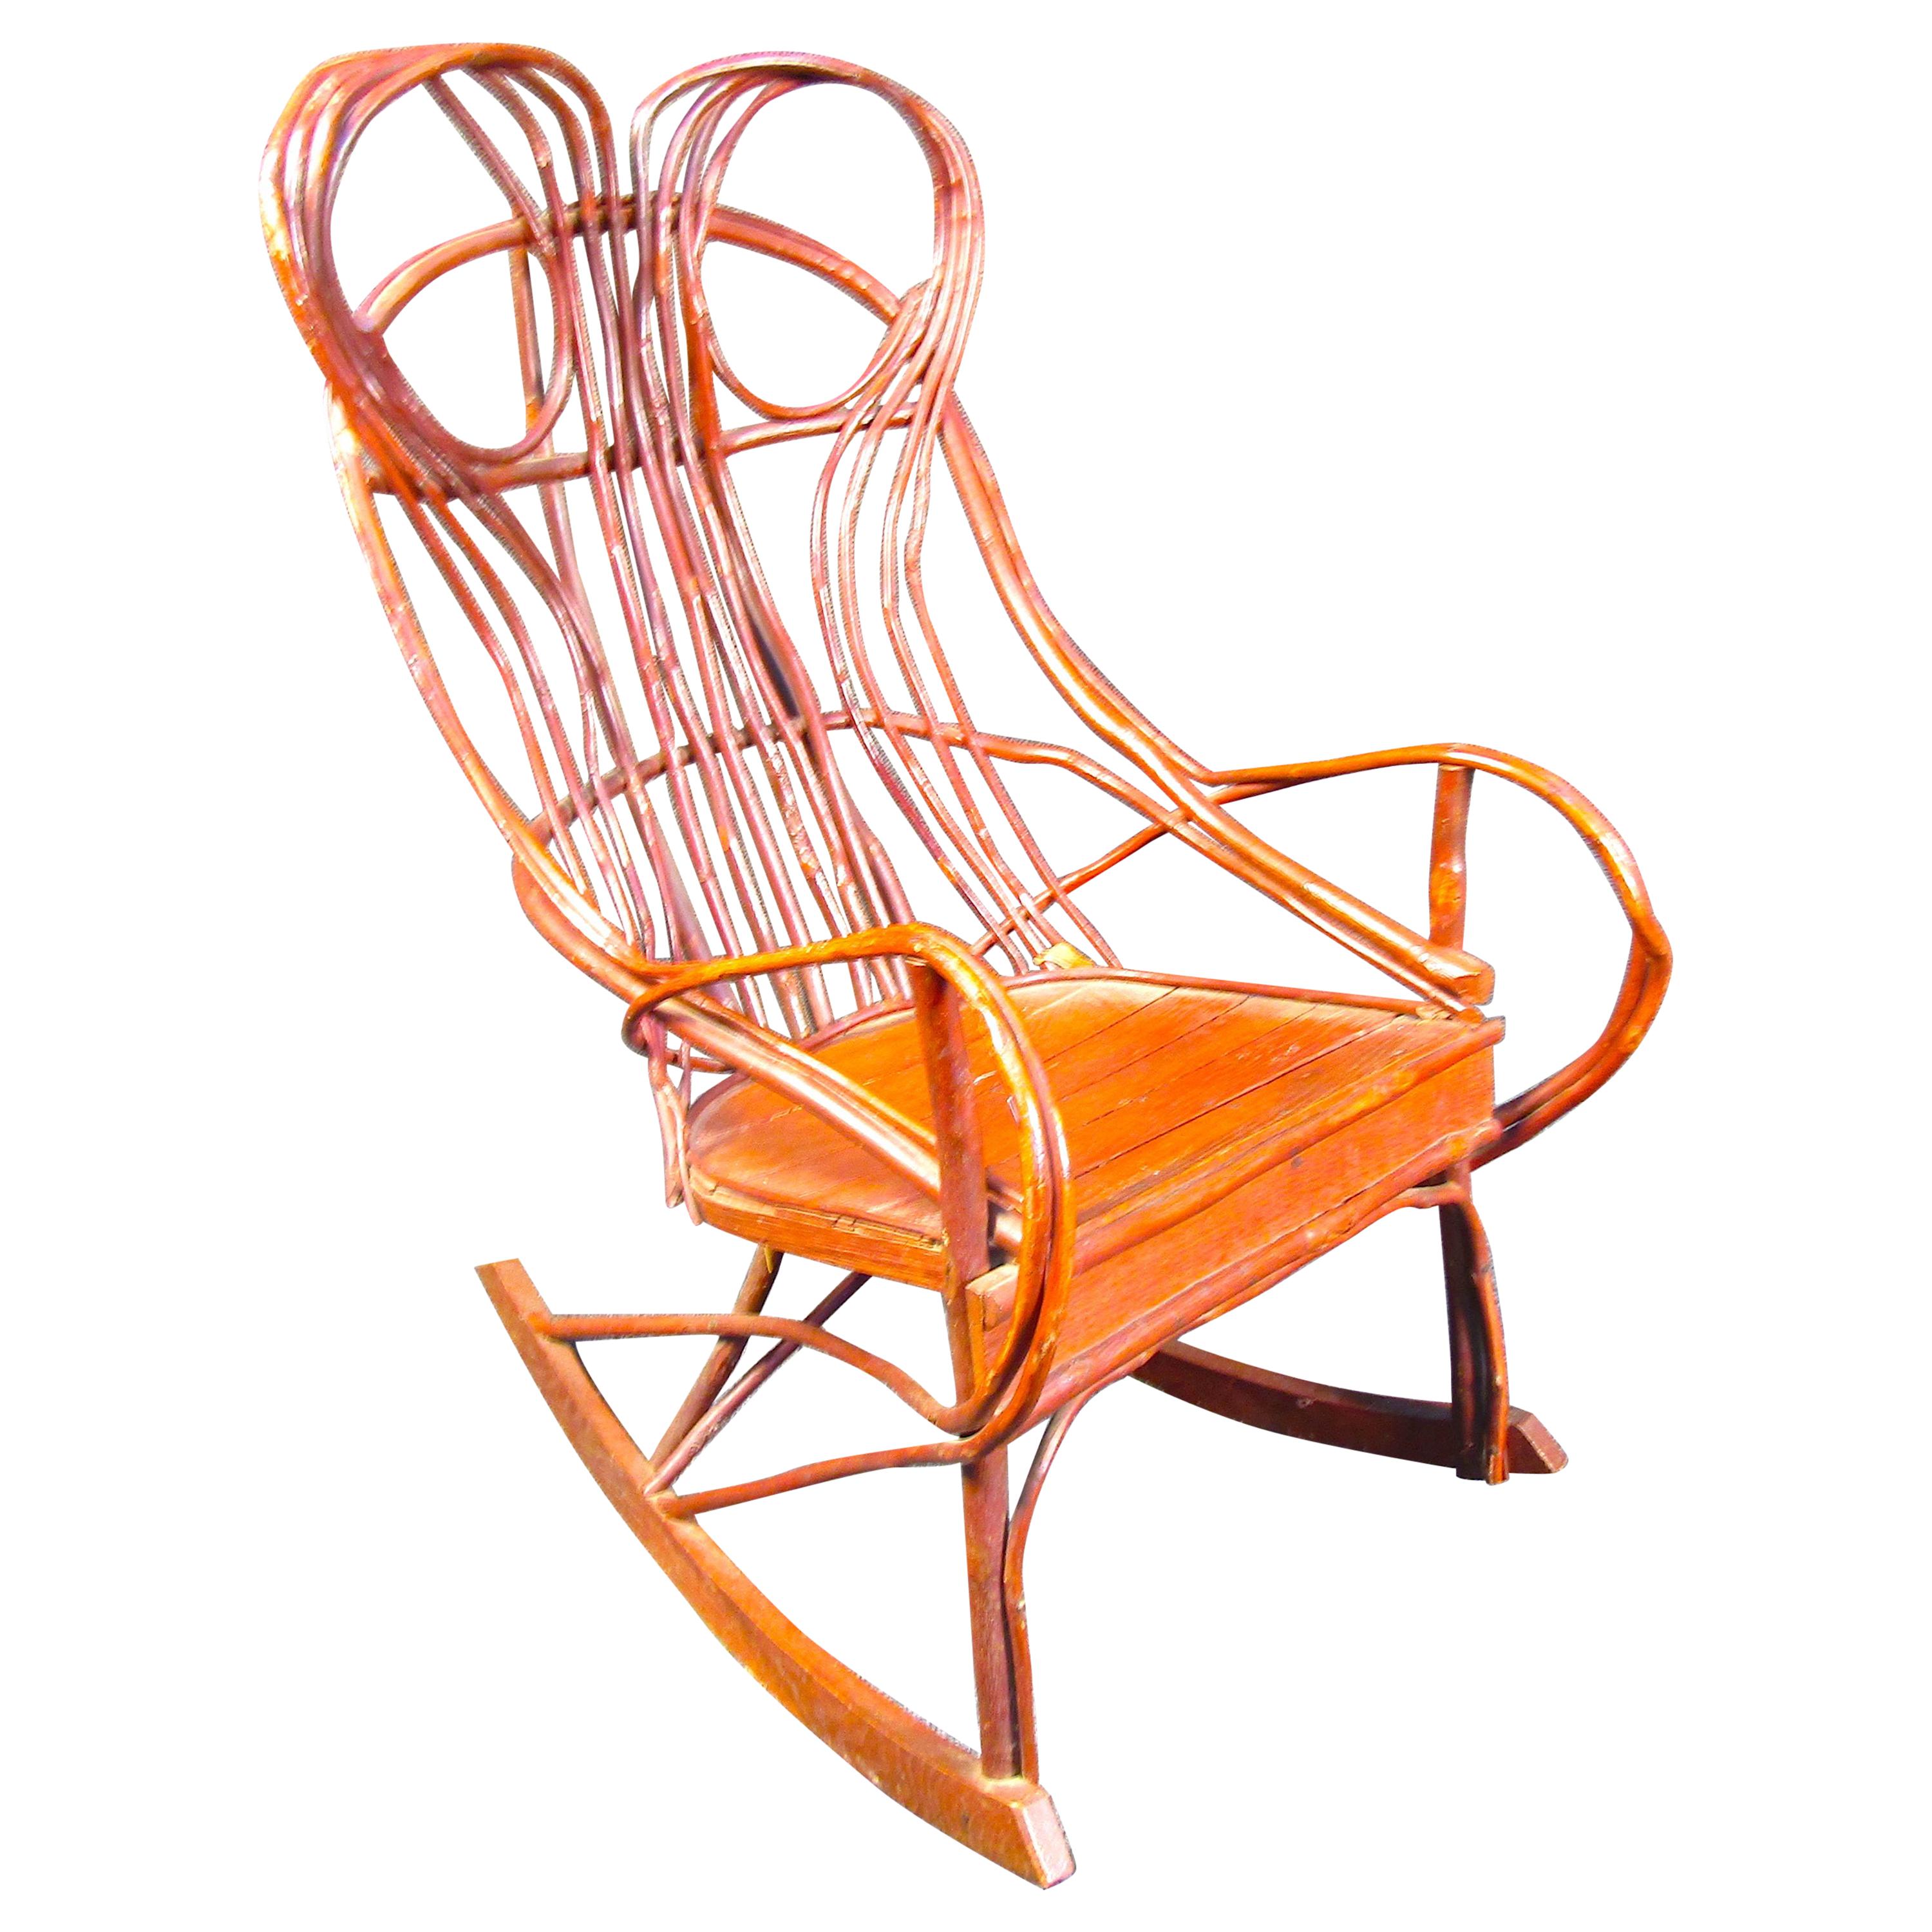 Midcentury "Woven Branch" Rocking Chair